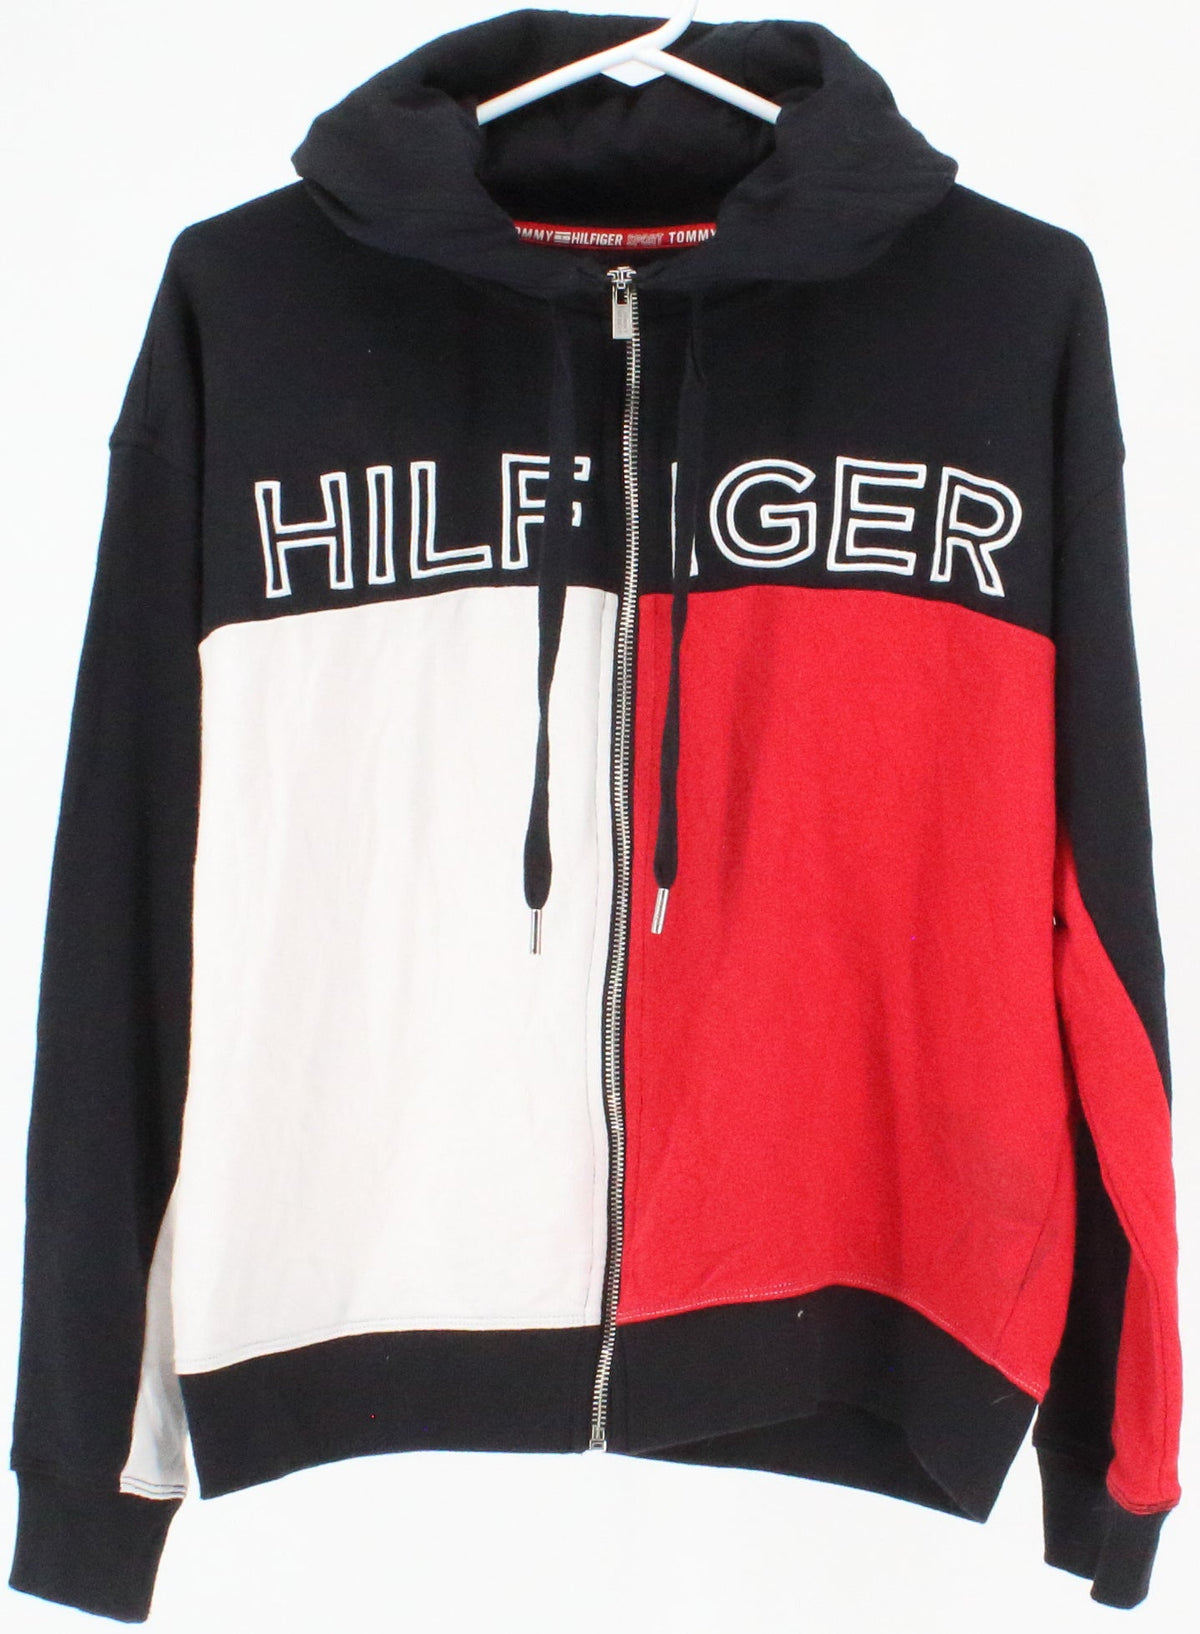 Tommy Hilfiger Black White and Red Full Zip Hooded Sweatshirt